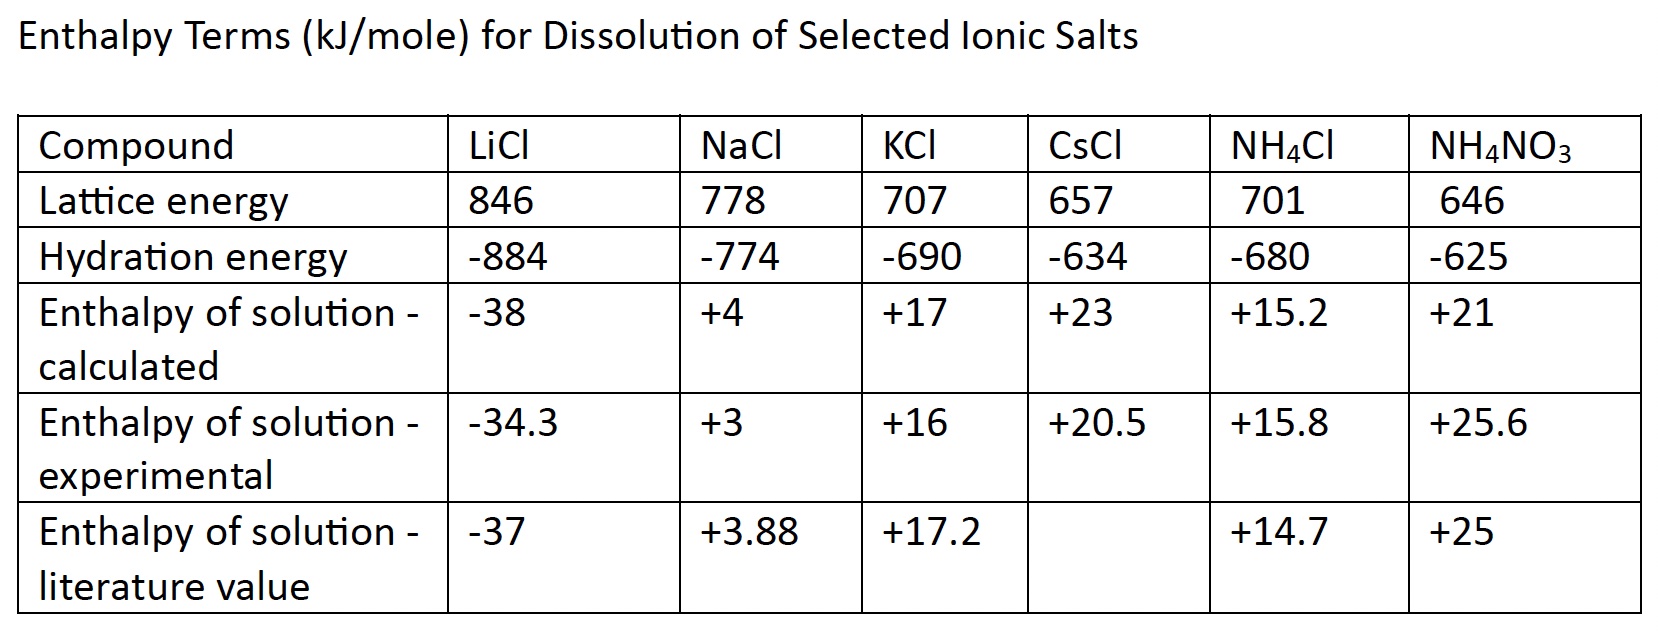 Heat of Solutions of Selected Chloride Salts